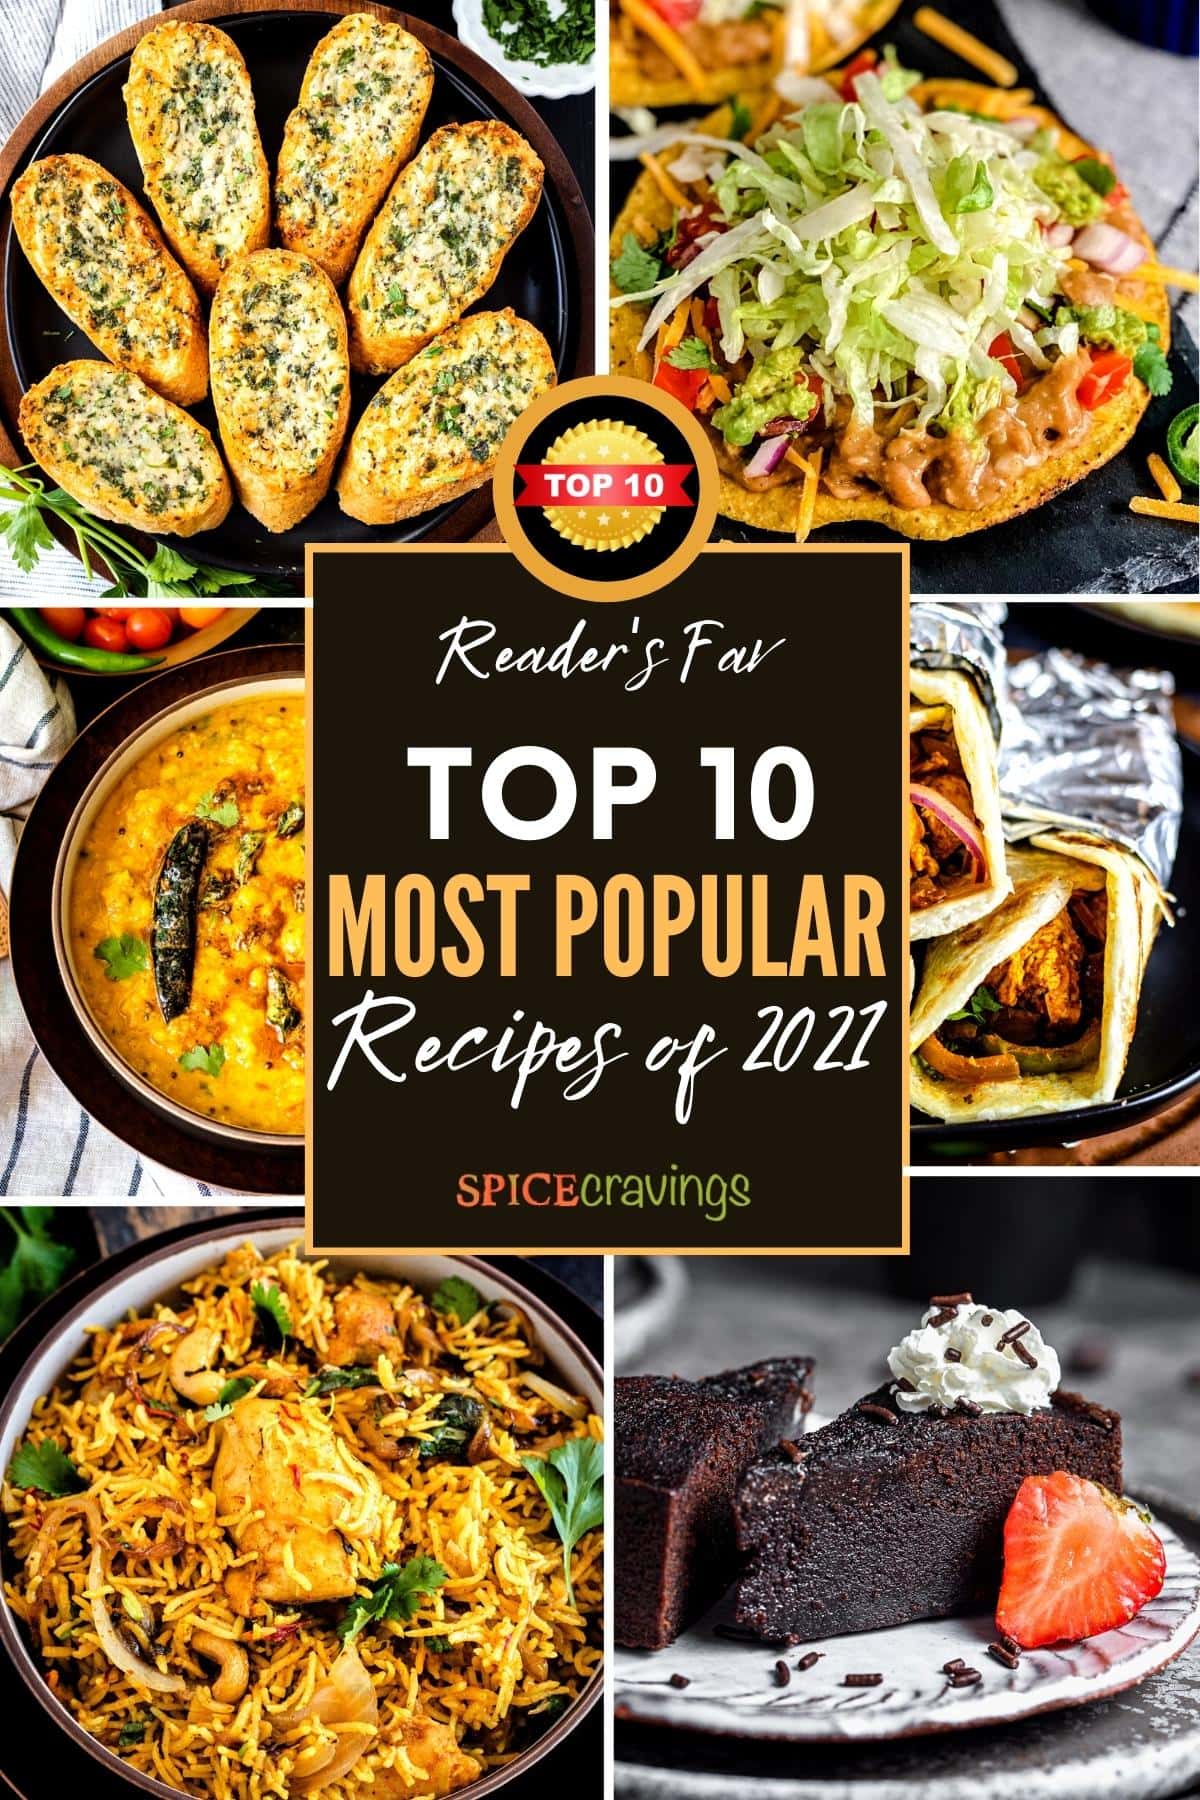 6-image grid of top 10 recipes including curry, rice, wraps and dessert